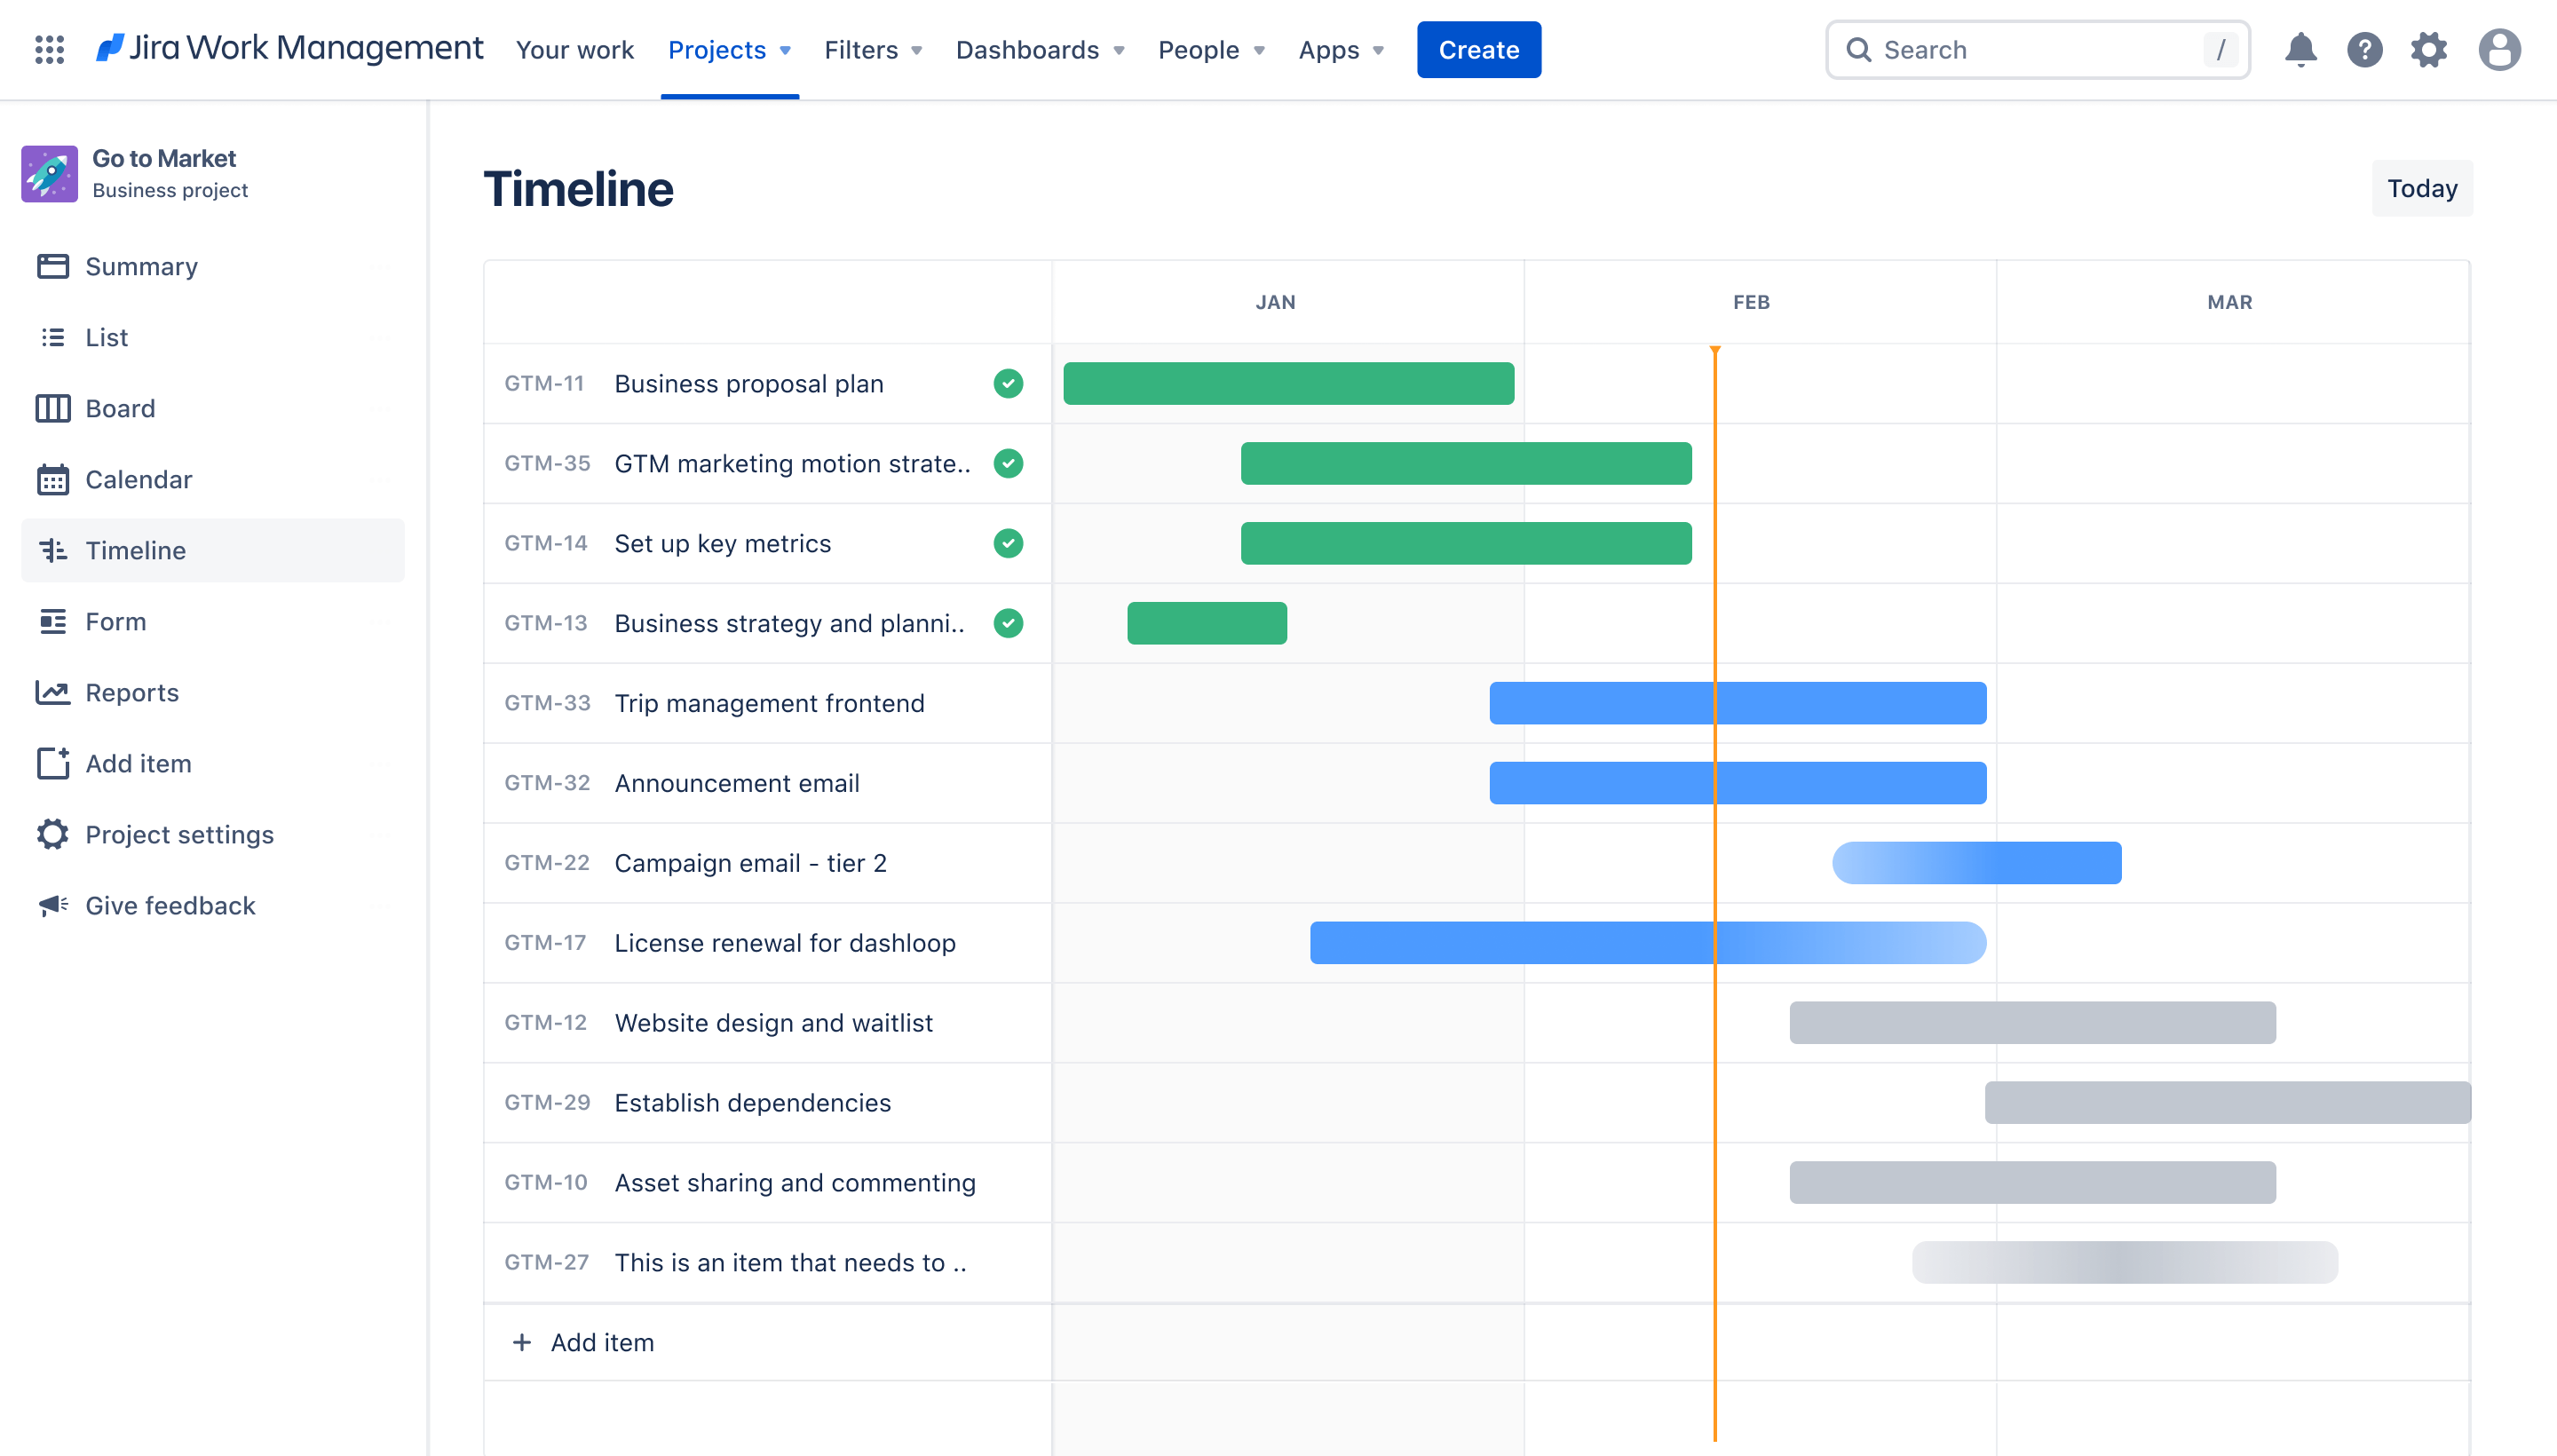 Go to market timeline view in Jira Work Management